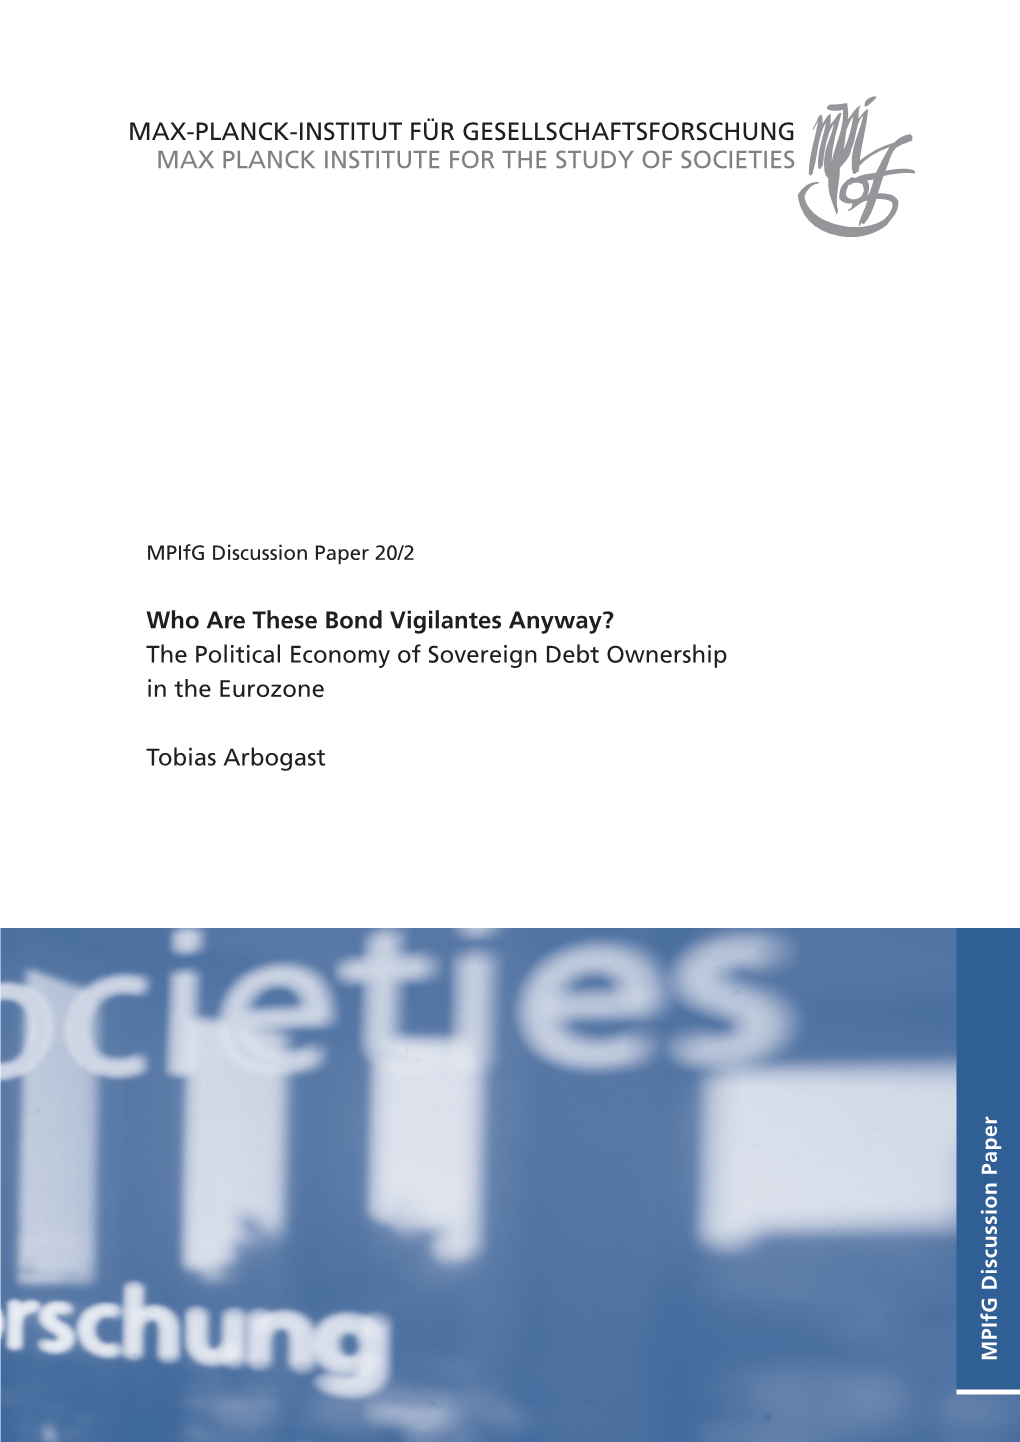 The Political Economy of Sovereign Debt Ownership in the Eurozone